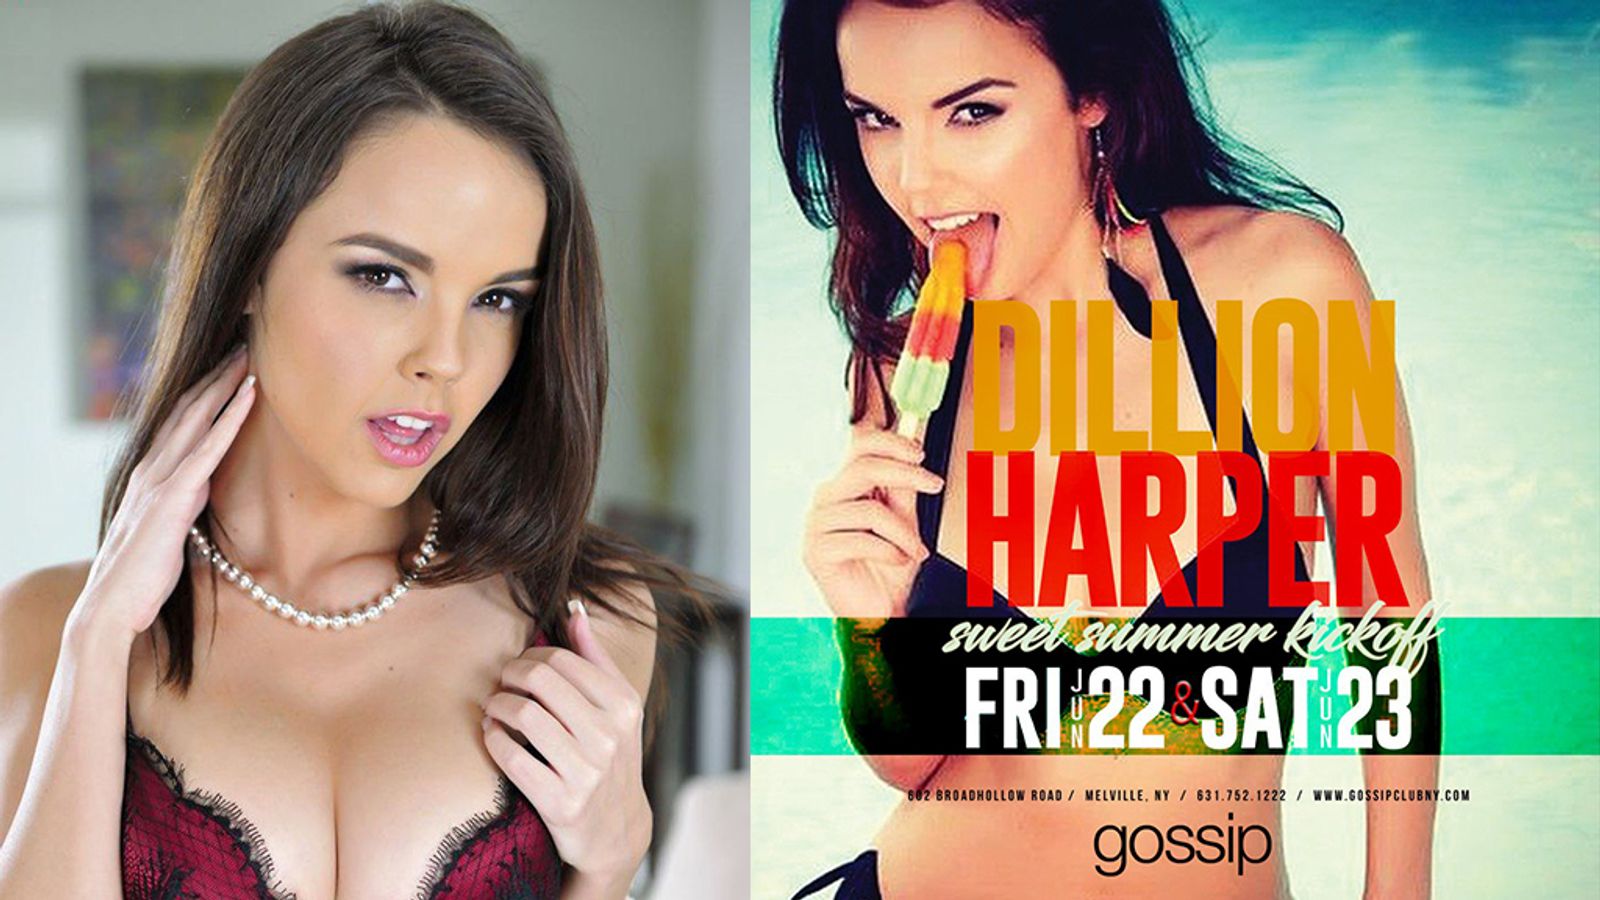 Dillion Harper To Dance The Night Away At NY's Gossip Club